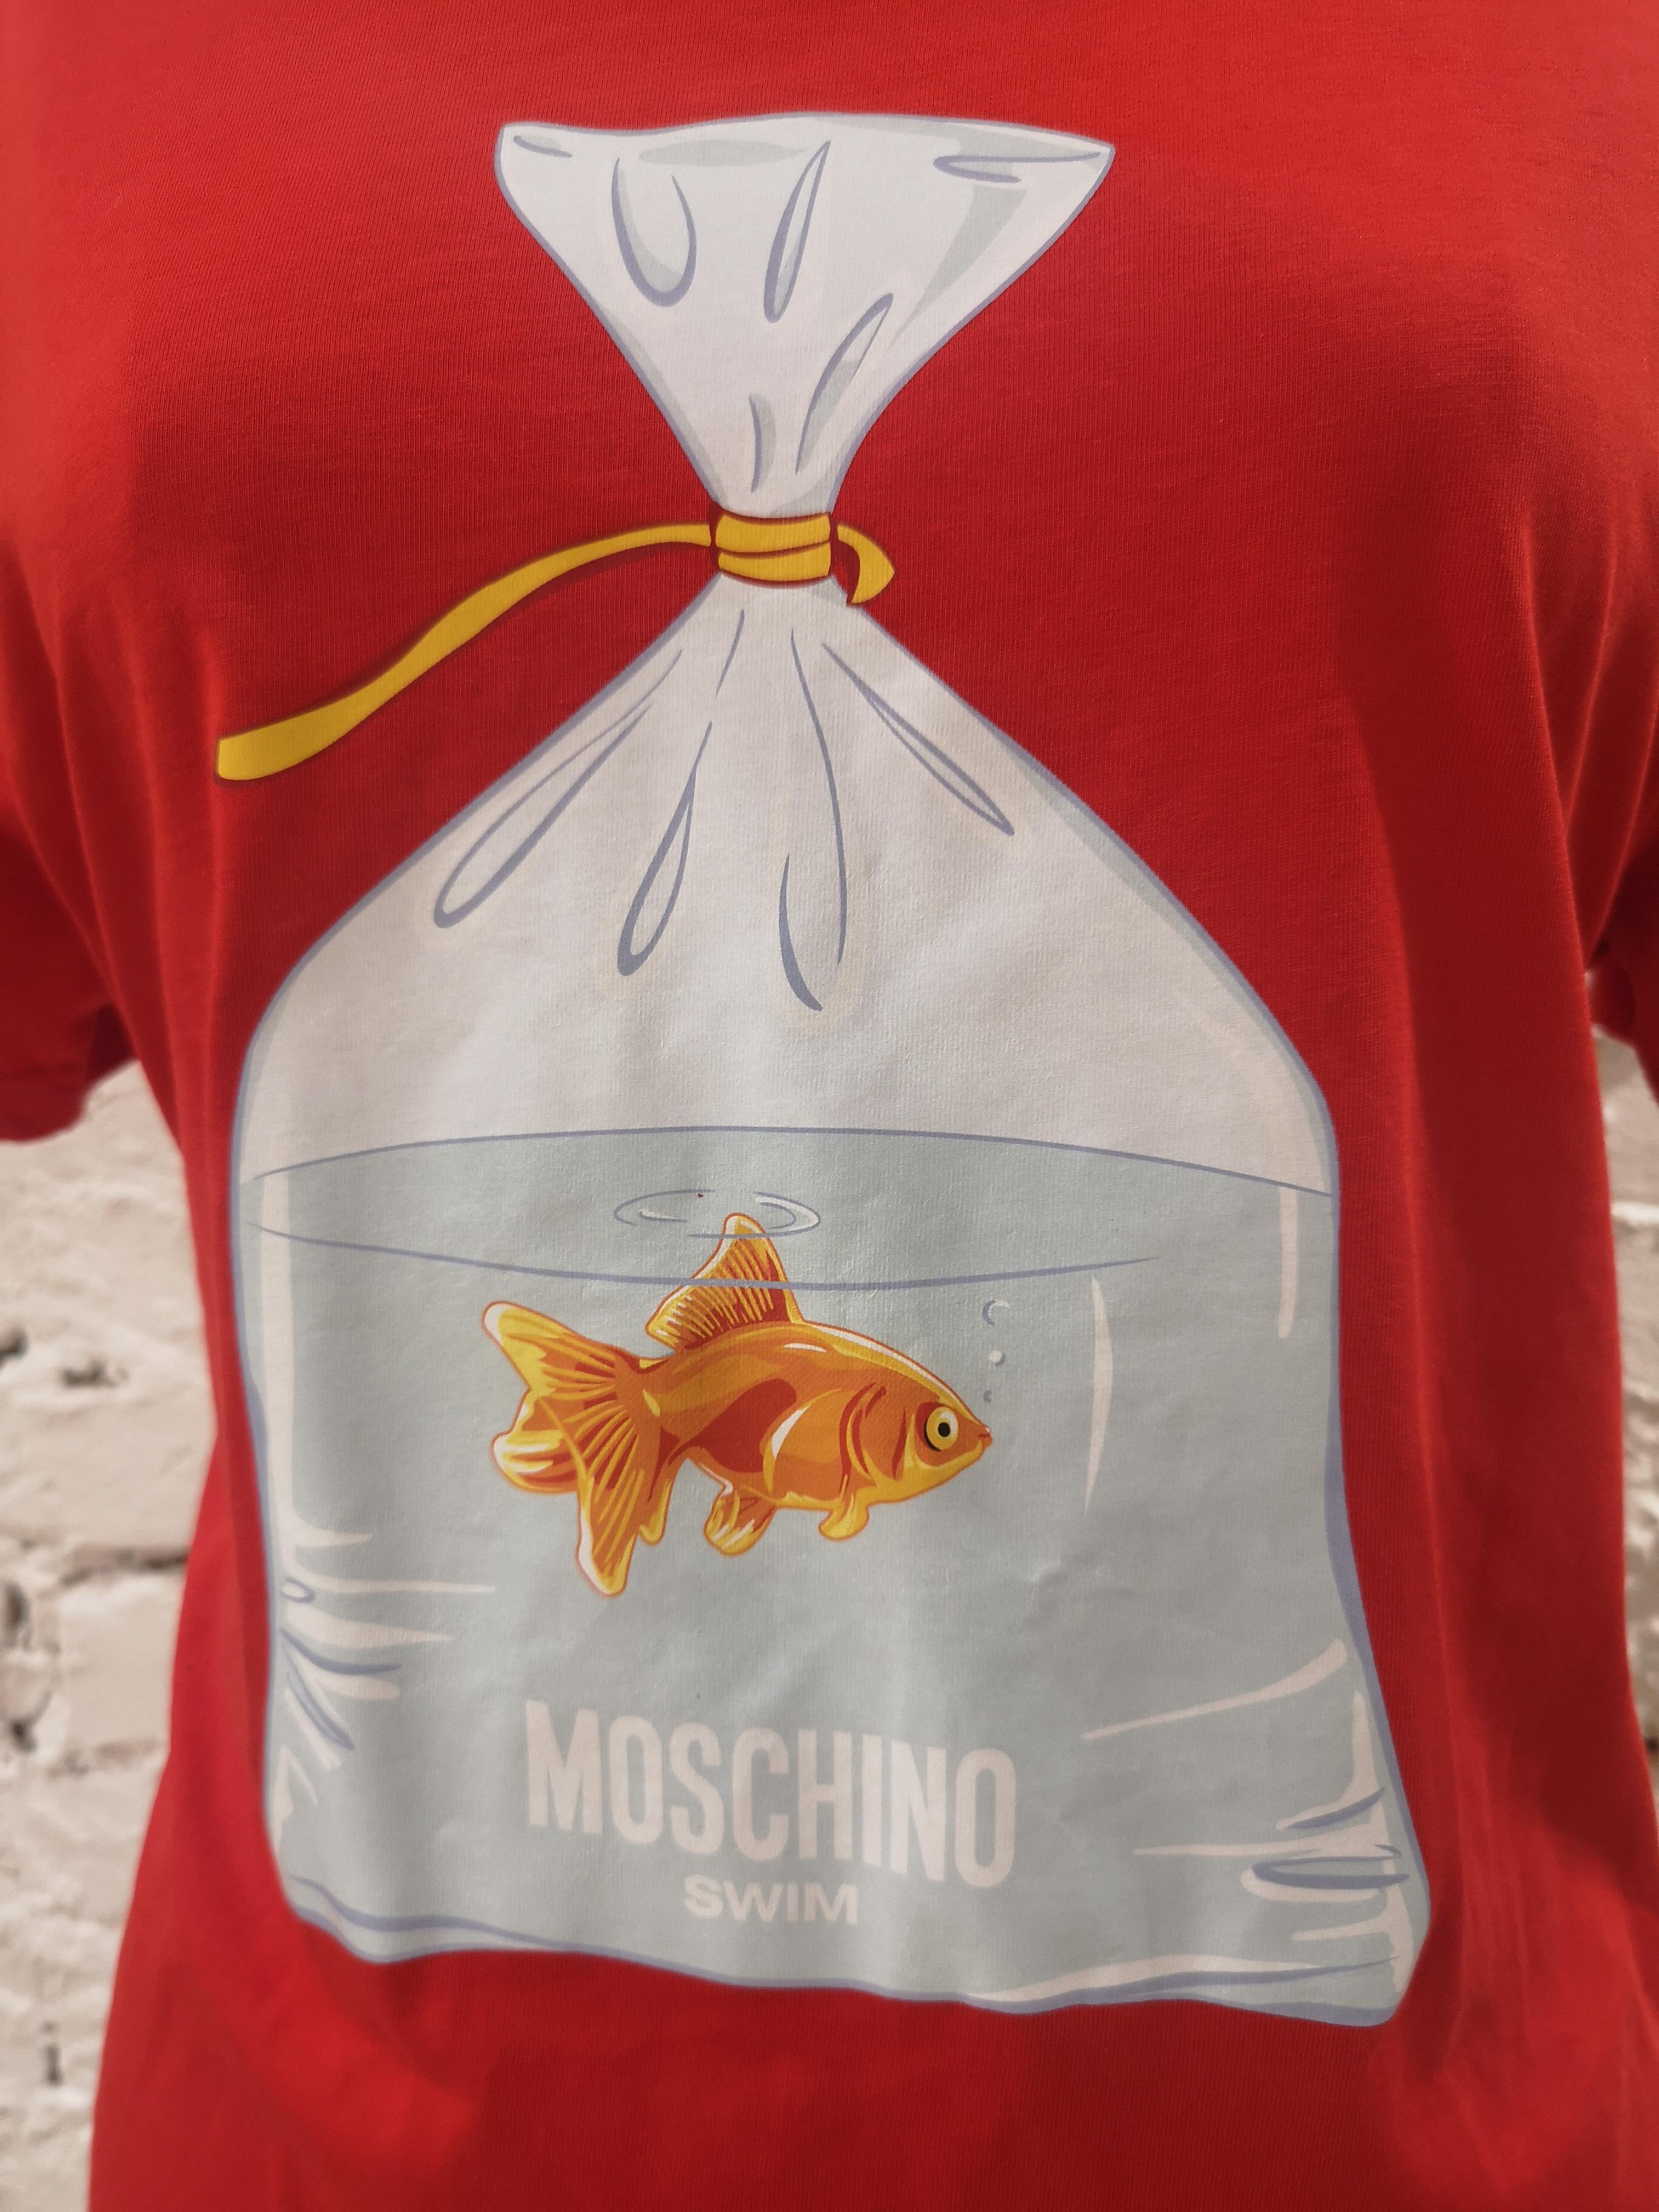 Moschino Swim red cotton t-shirt
totally made in italy in size XS
total lenght 69 cm
shoulder to hem 20 cm